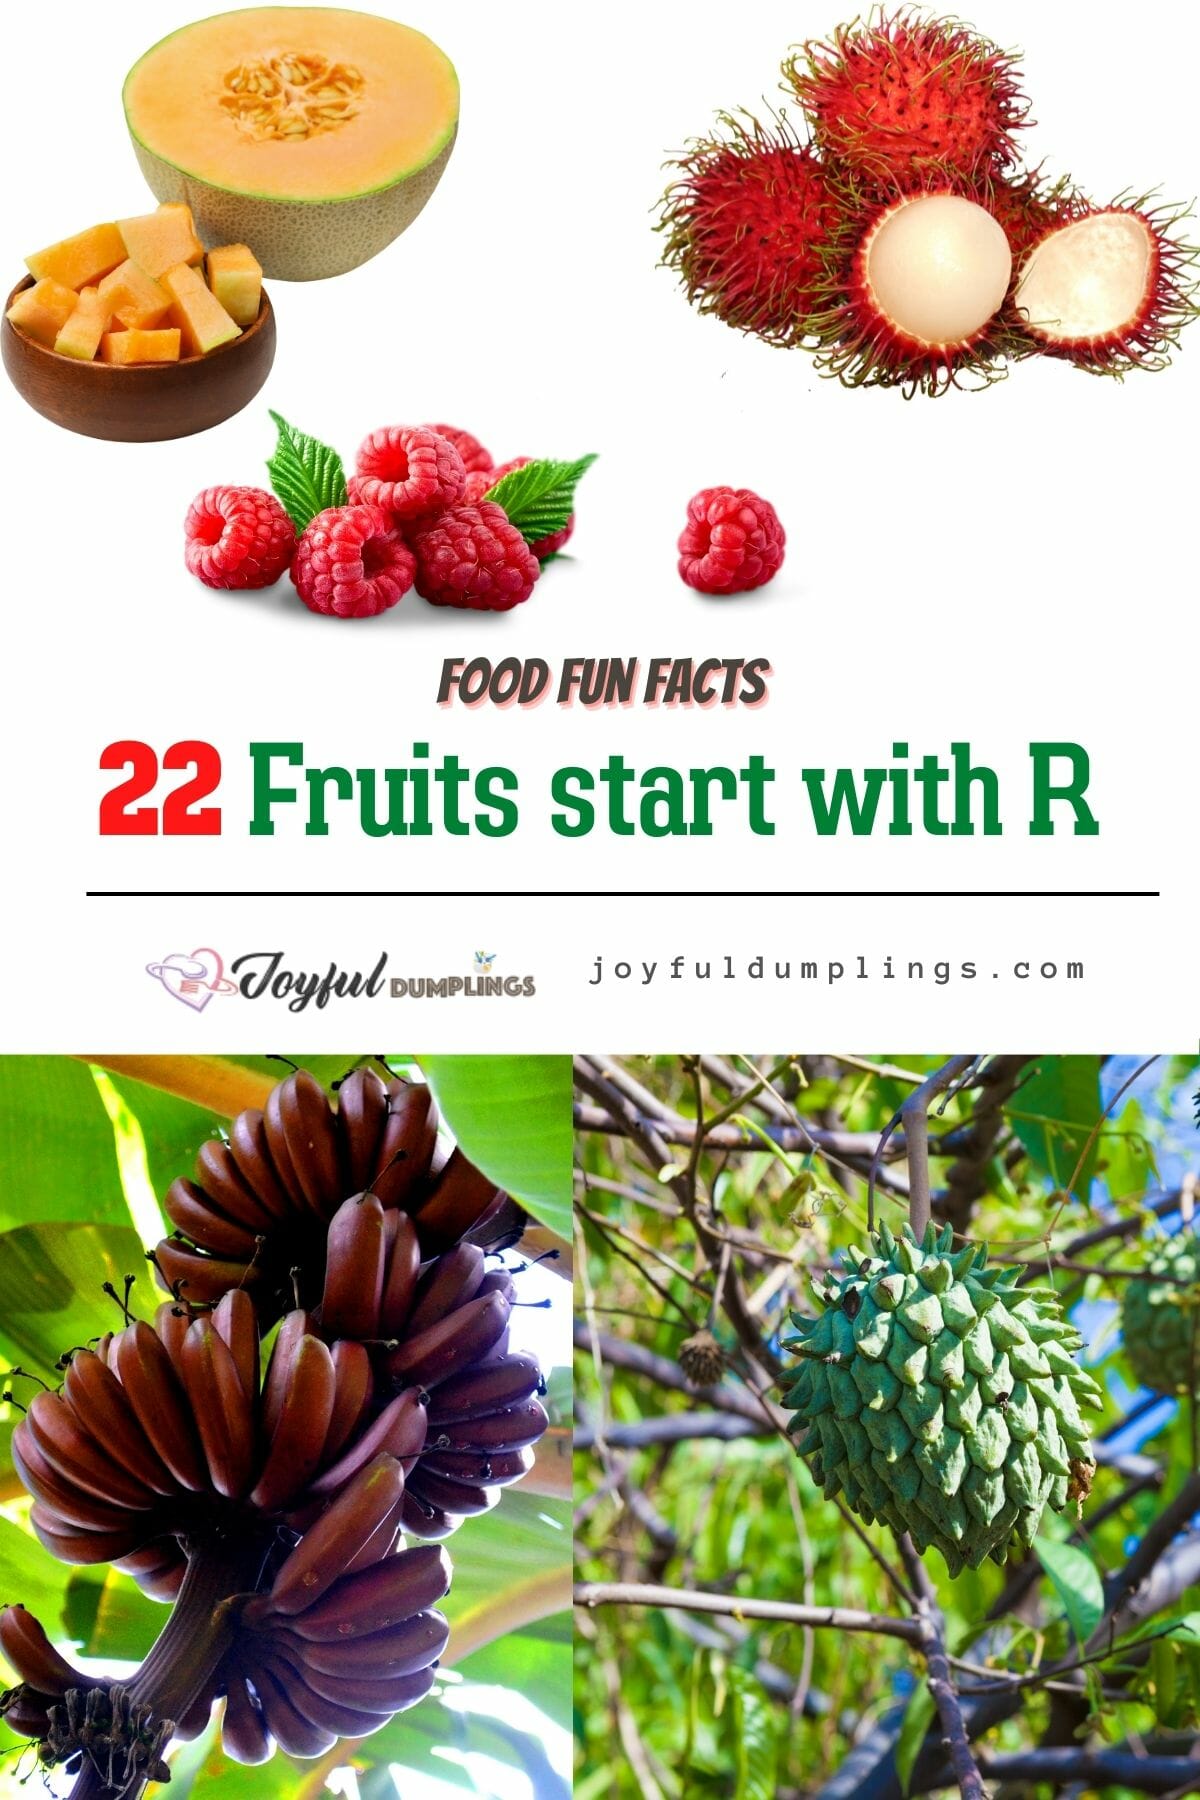 22 Fruits Start with R